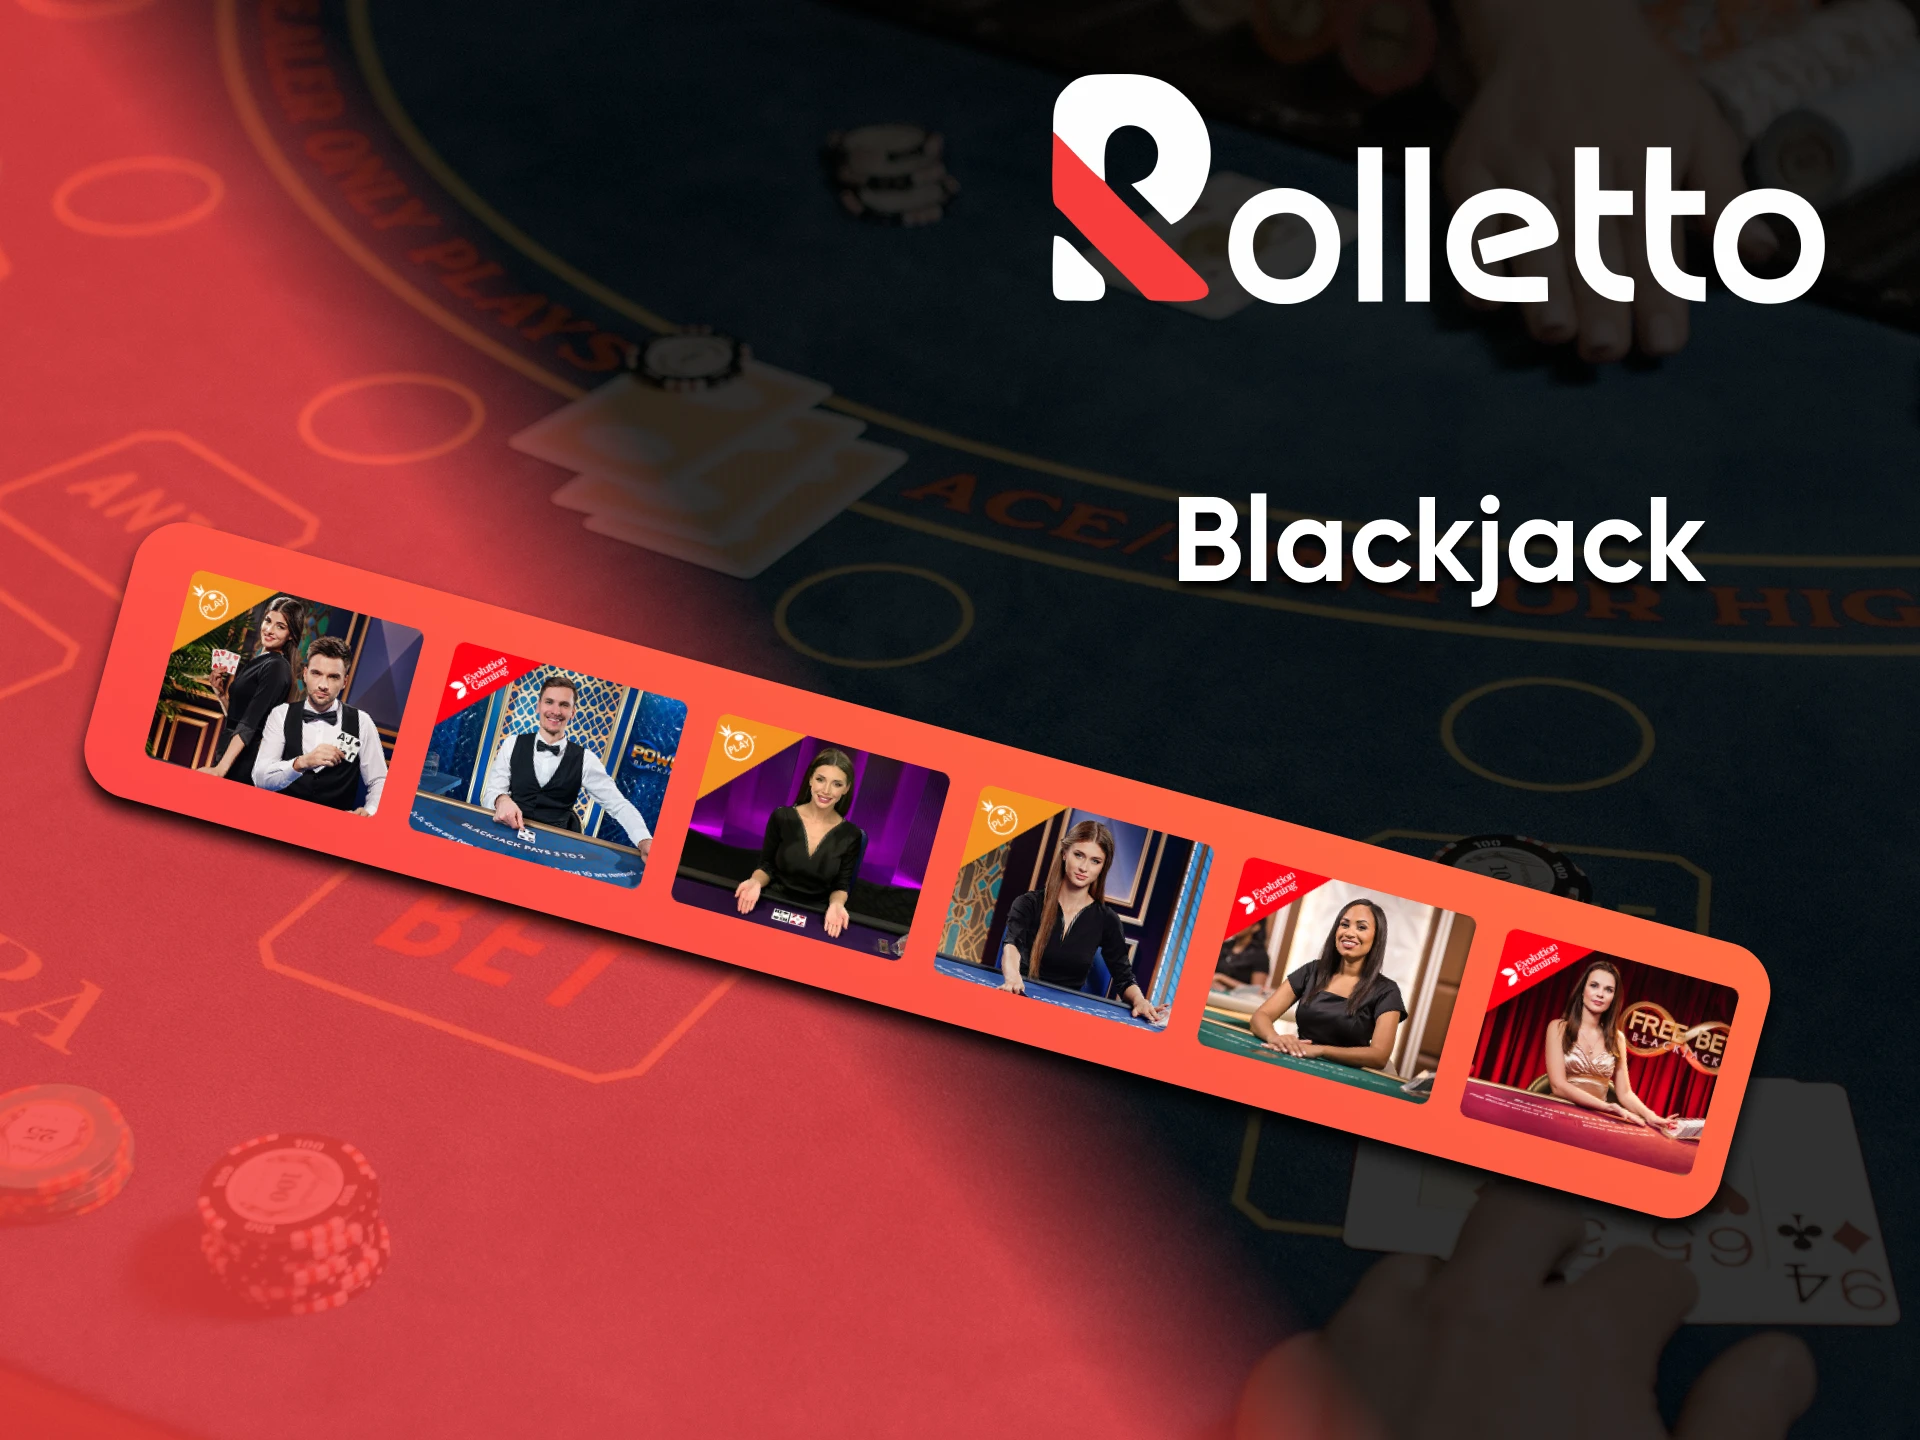 To play Blackjack, go to the special section of the Rolletto website.